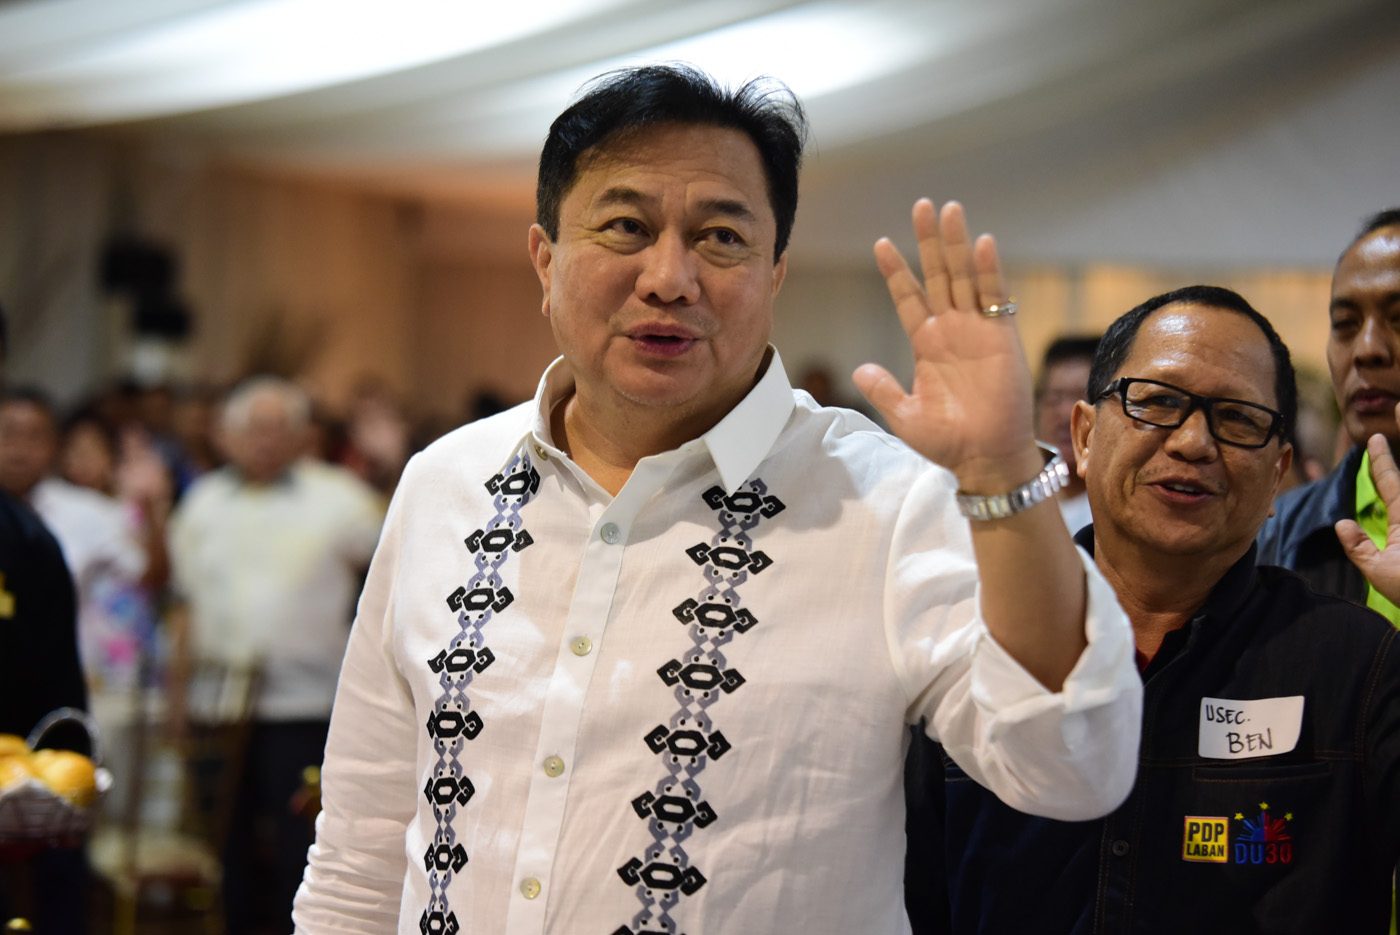 Alvarez warned: You’ll lose allies over arm-twisting on death penalty